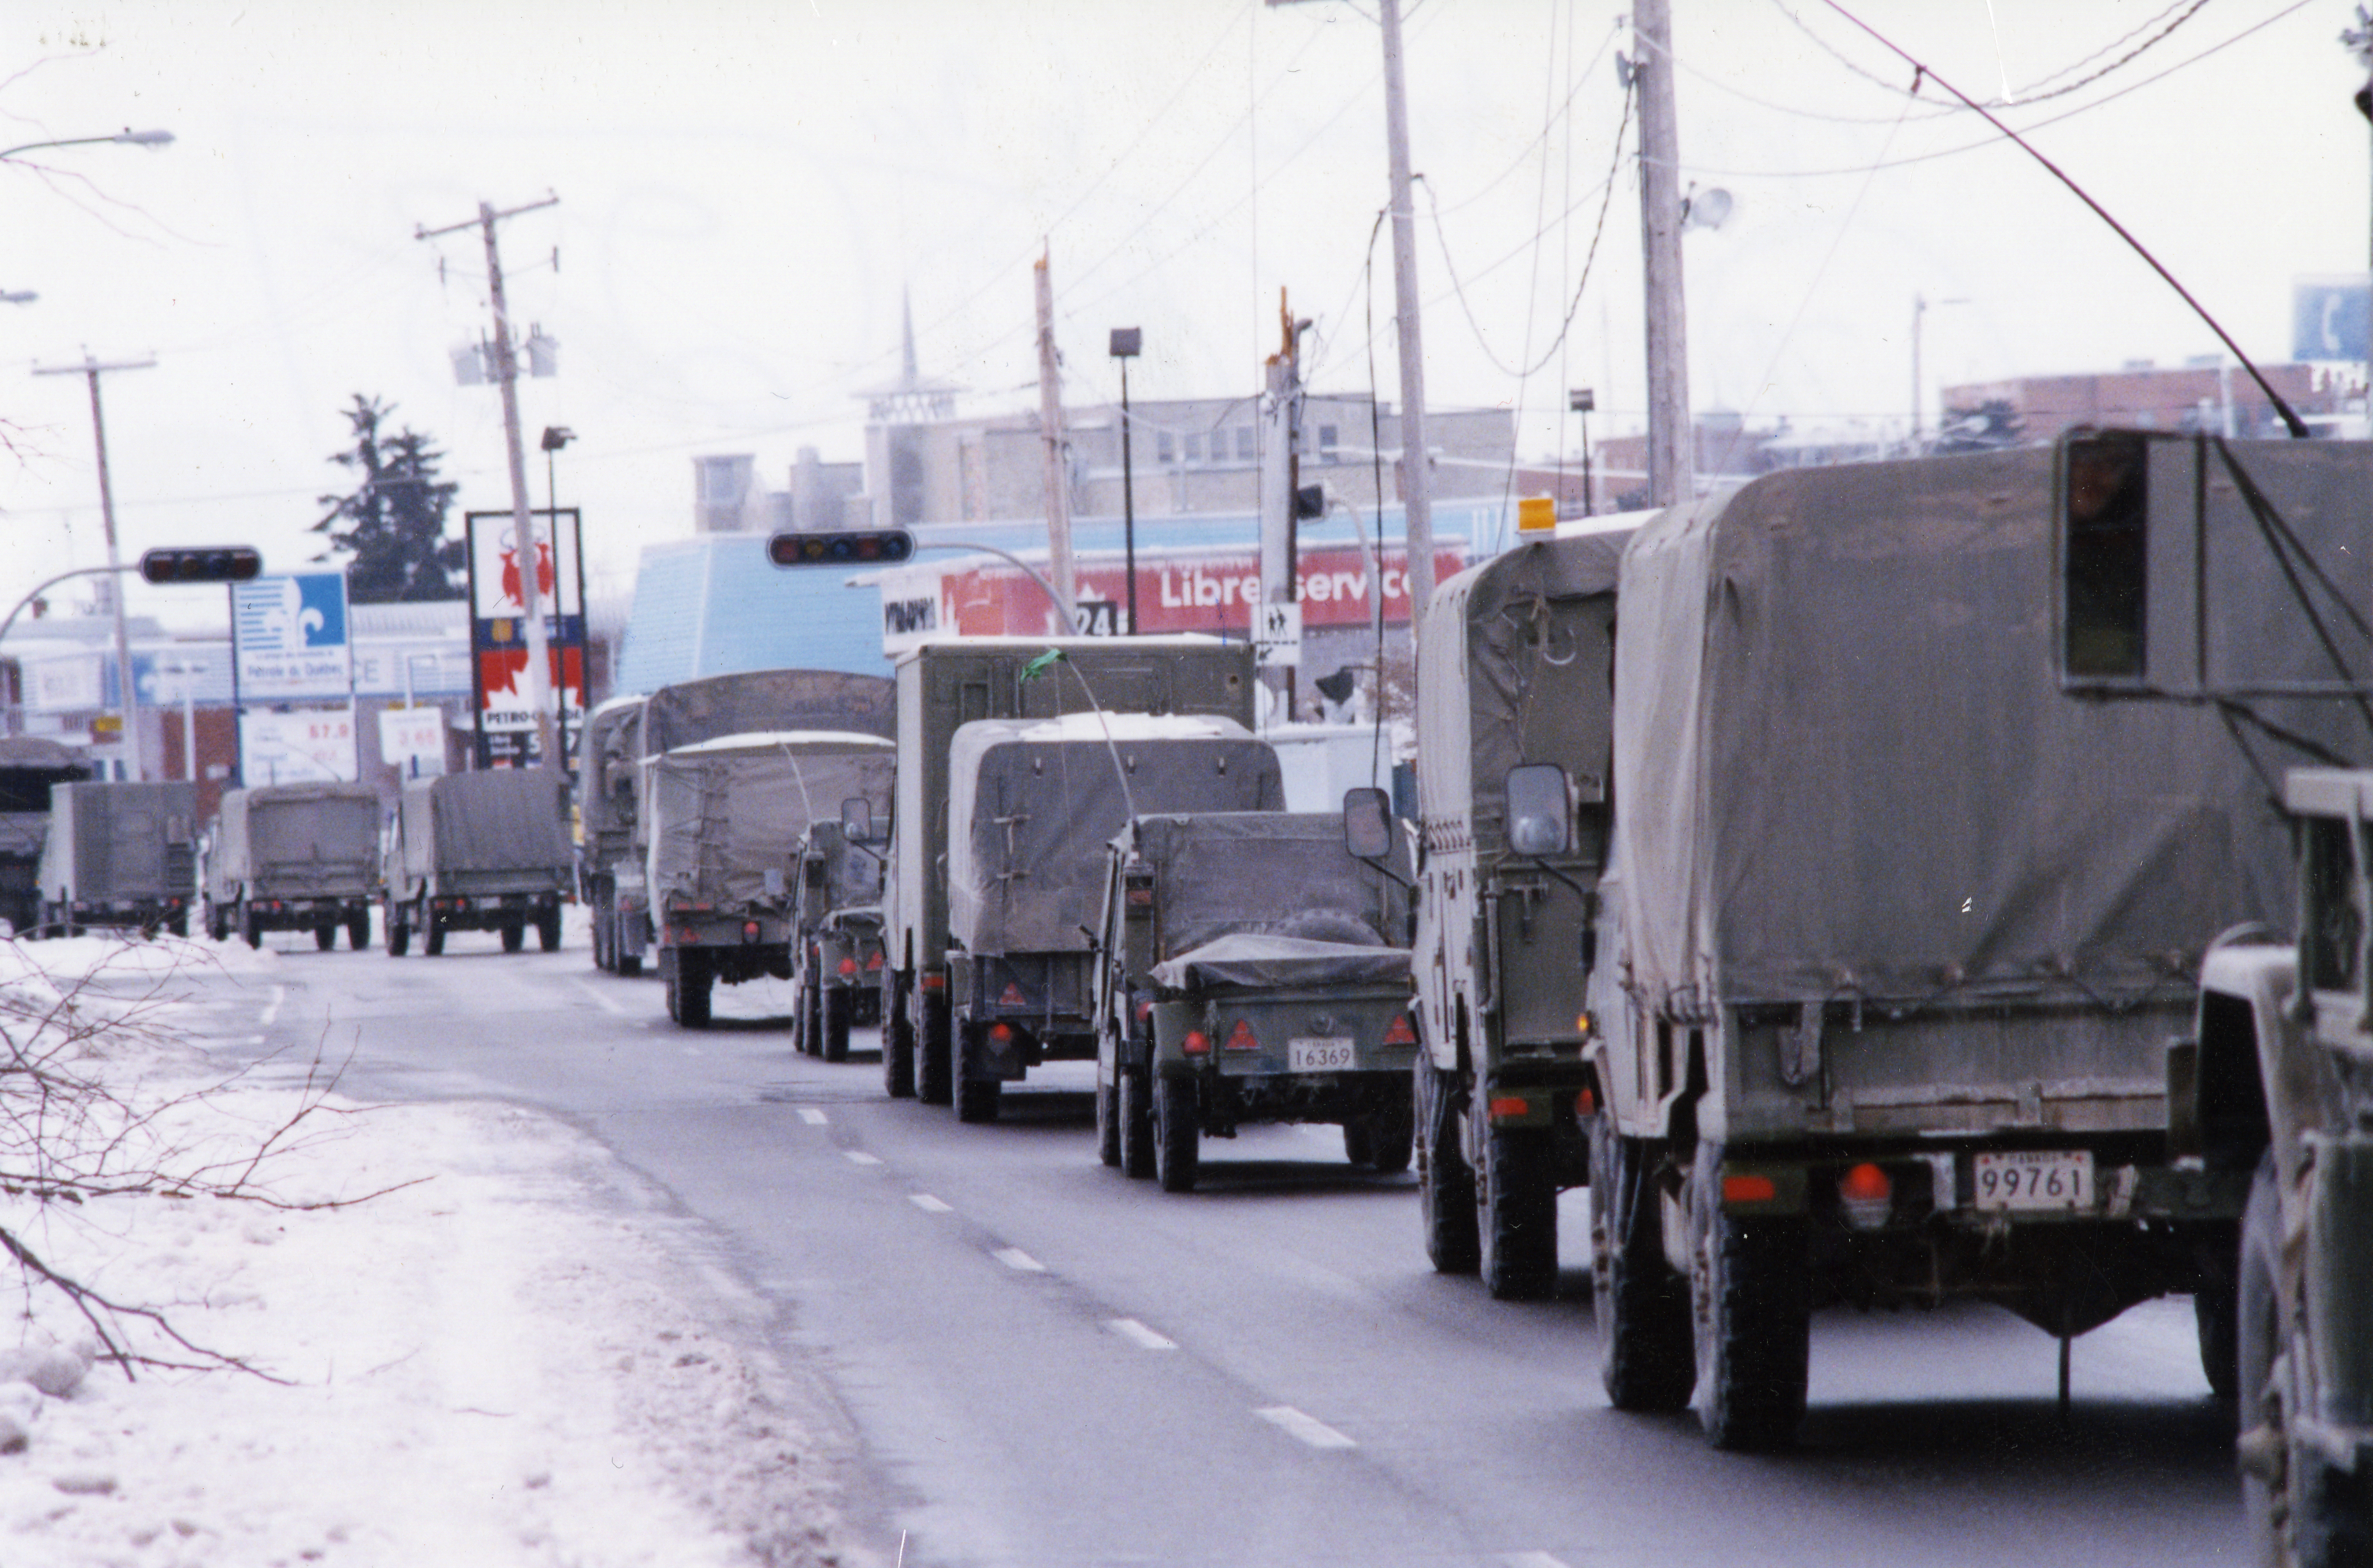 The military arrives for reinforcement. They are seen on Séminaire Boulevard, in direction of the military base.